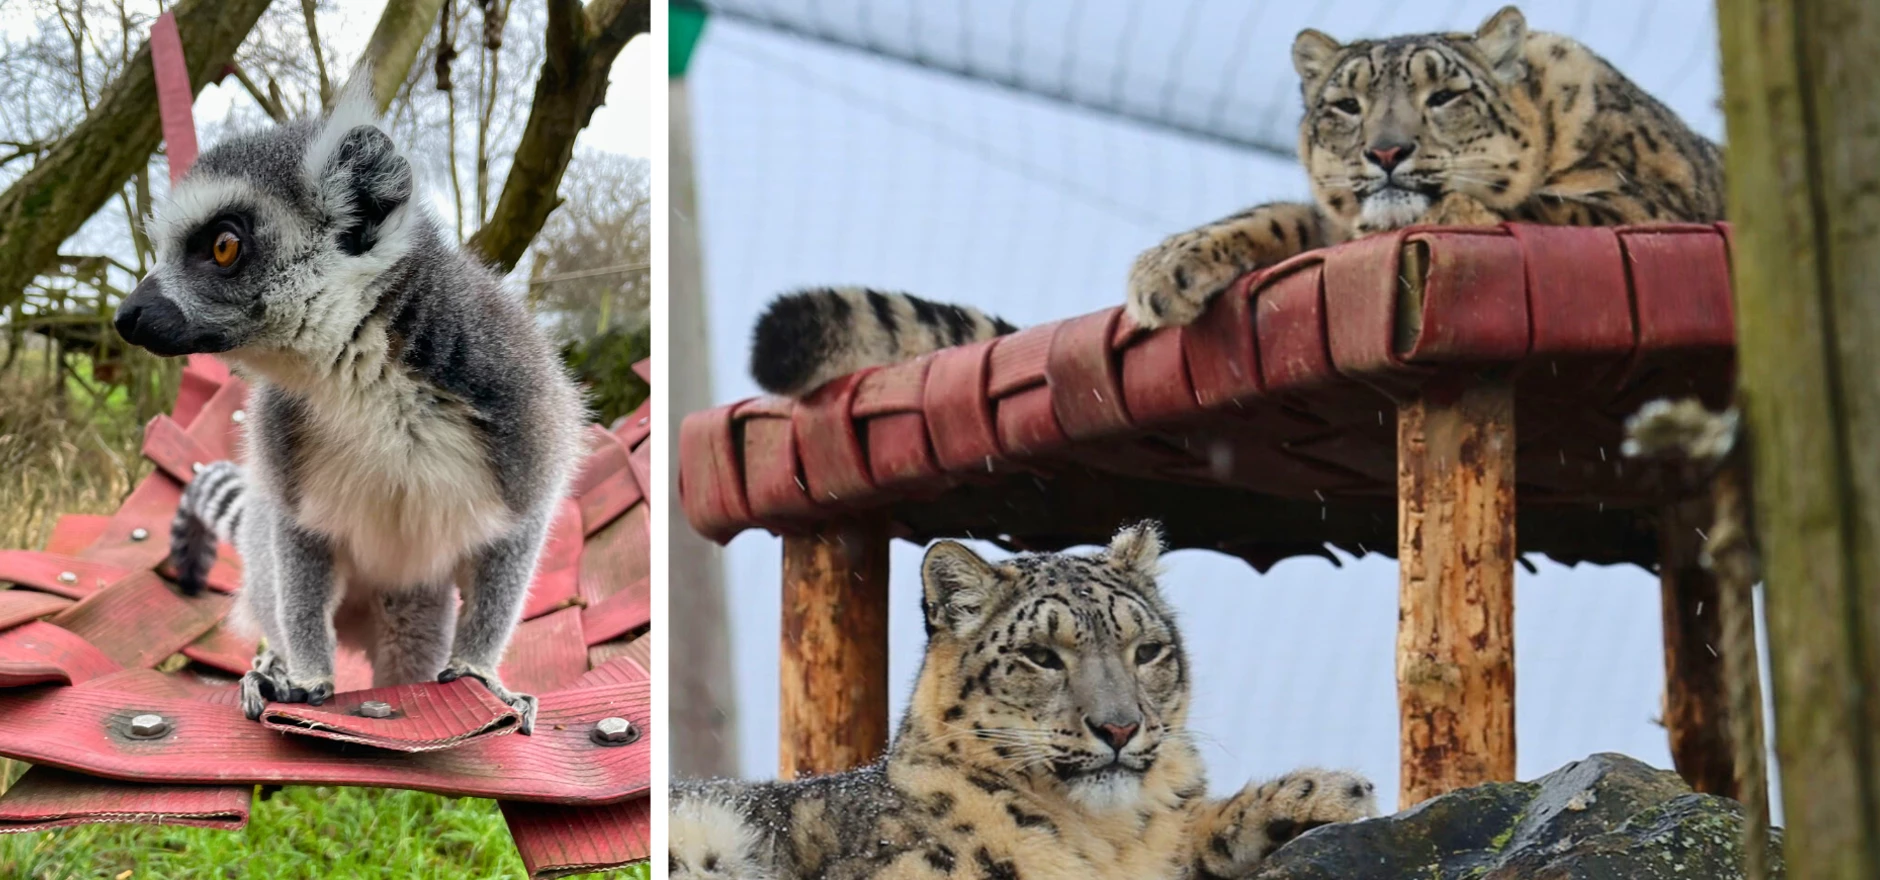 Arthur the ring-tailed Lemur pictured alongside snow leopards Karli and Nieva.